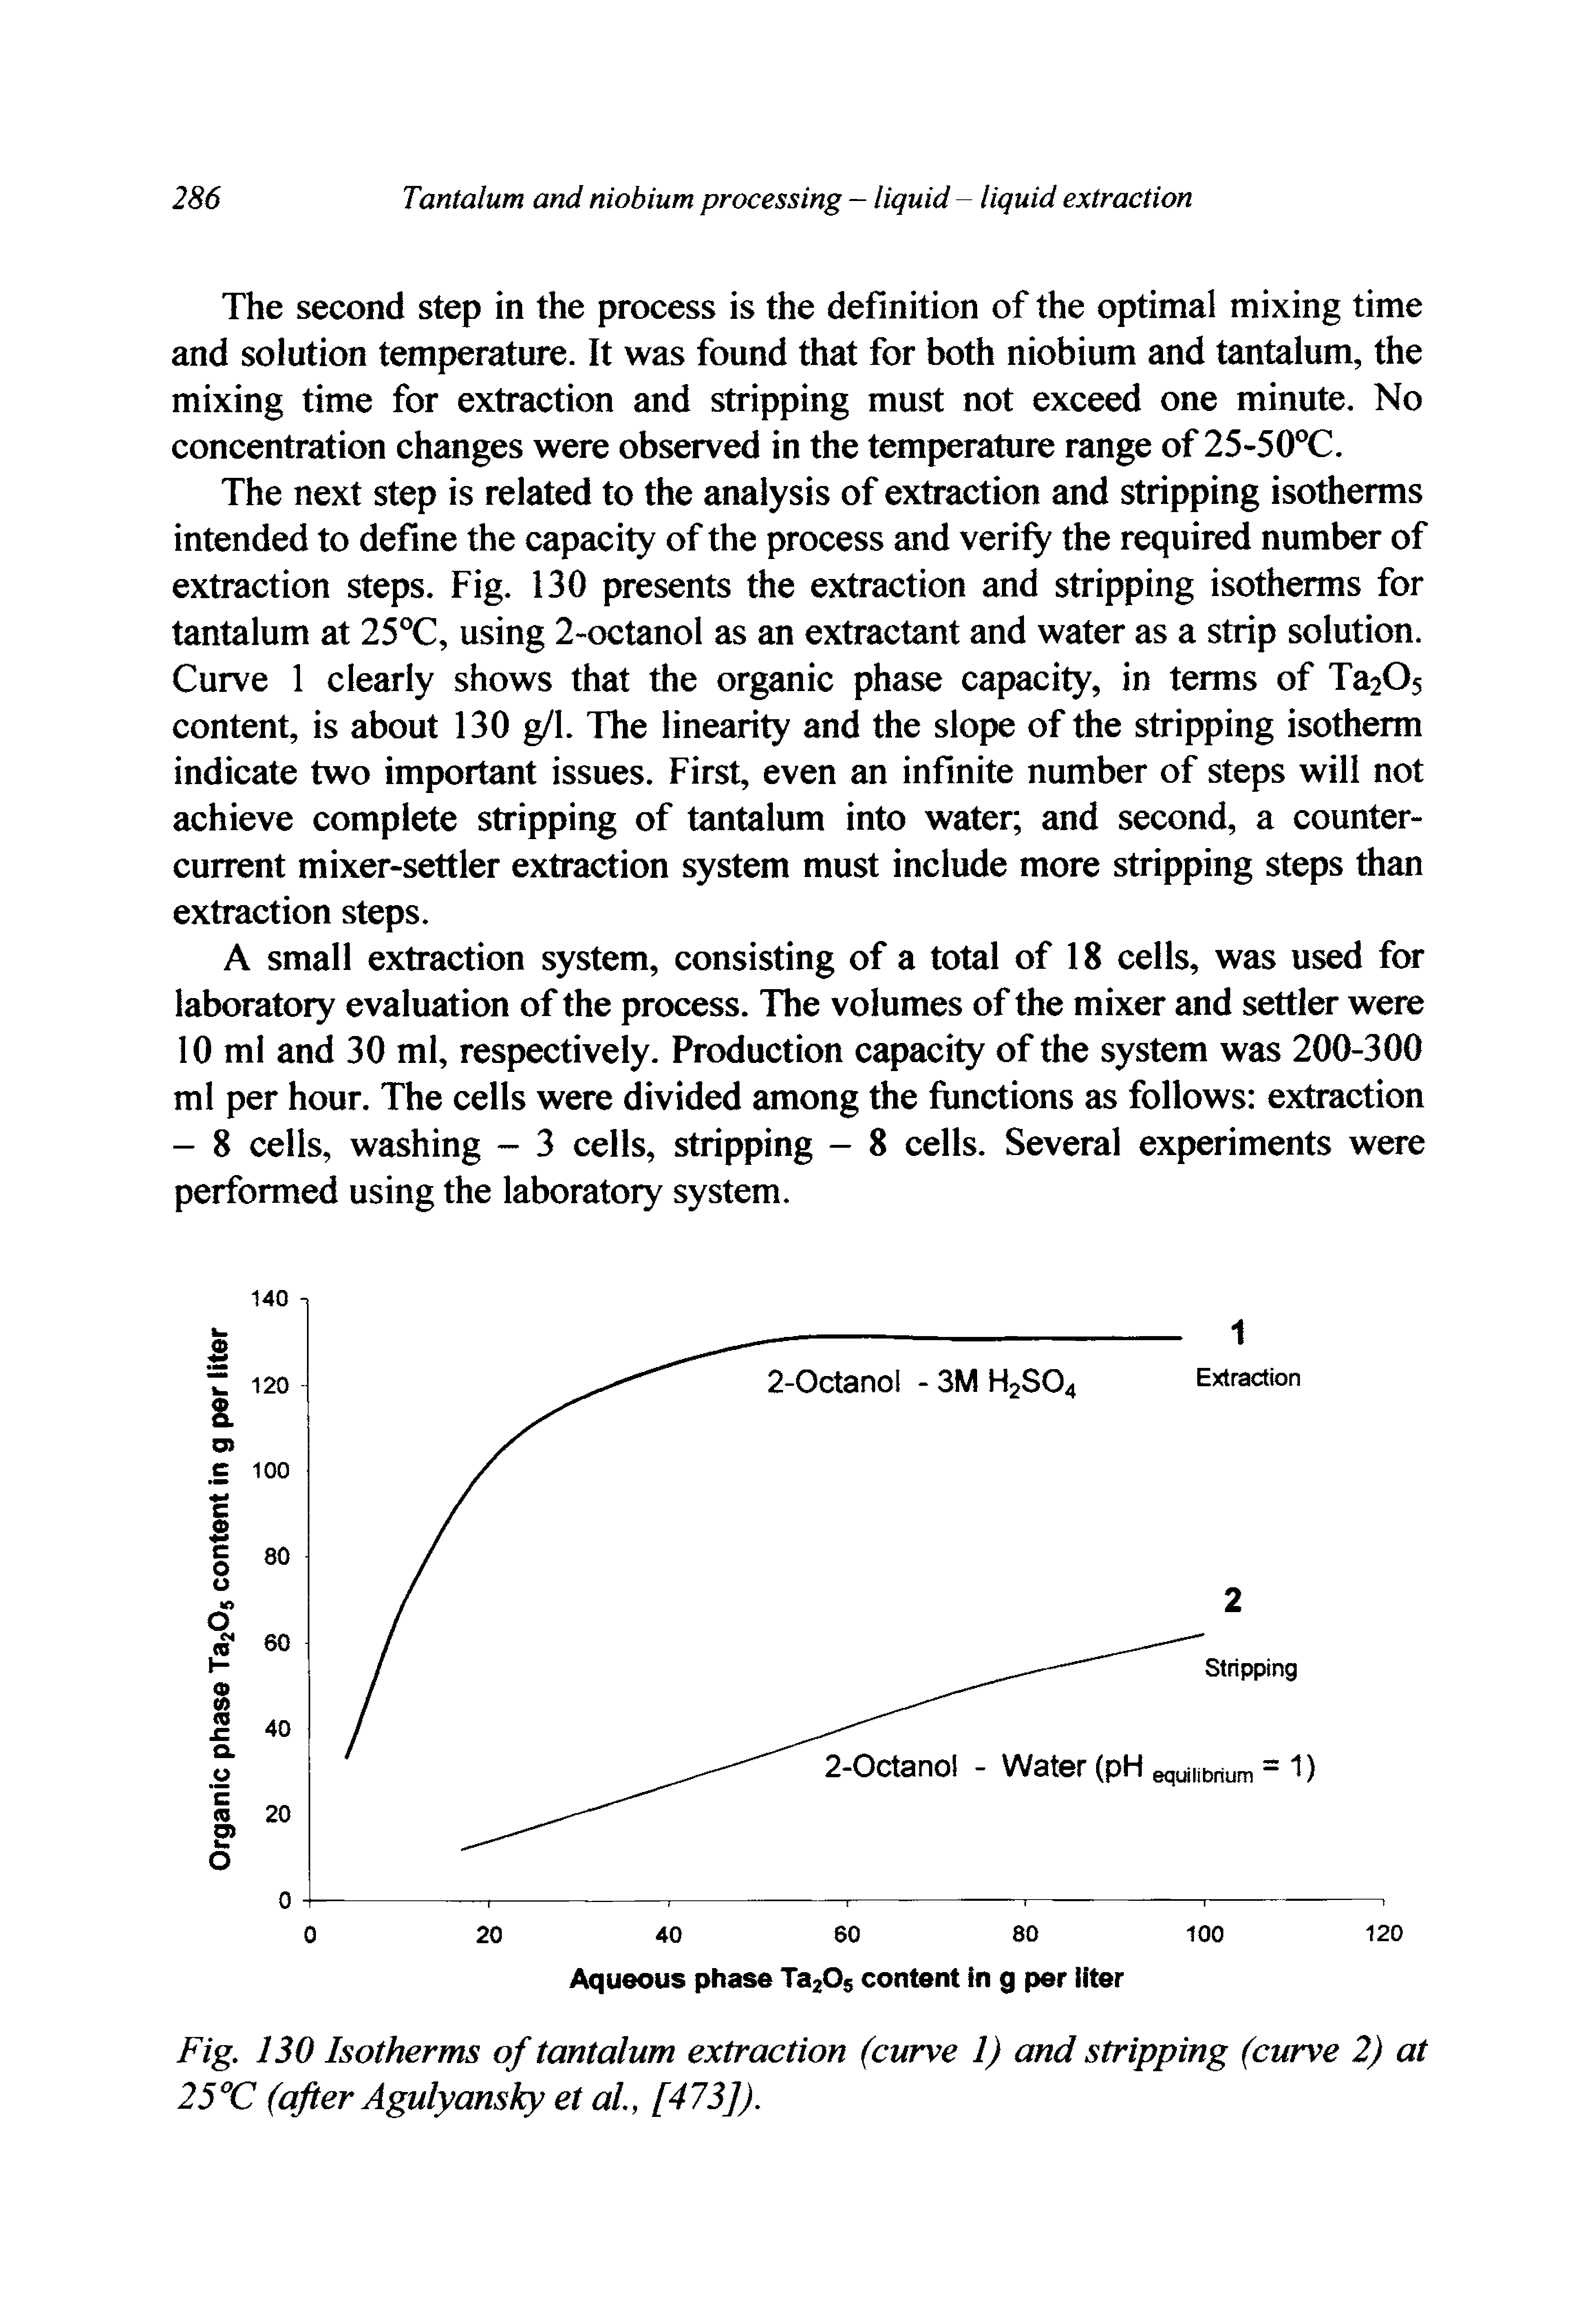 Fig. 130 Isotherms of tantalum extraction (curve 1) and stripping (curve 2) at 25°C (after Agulyansky et al., [473]).